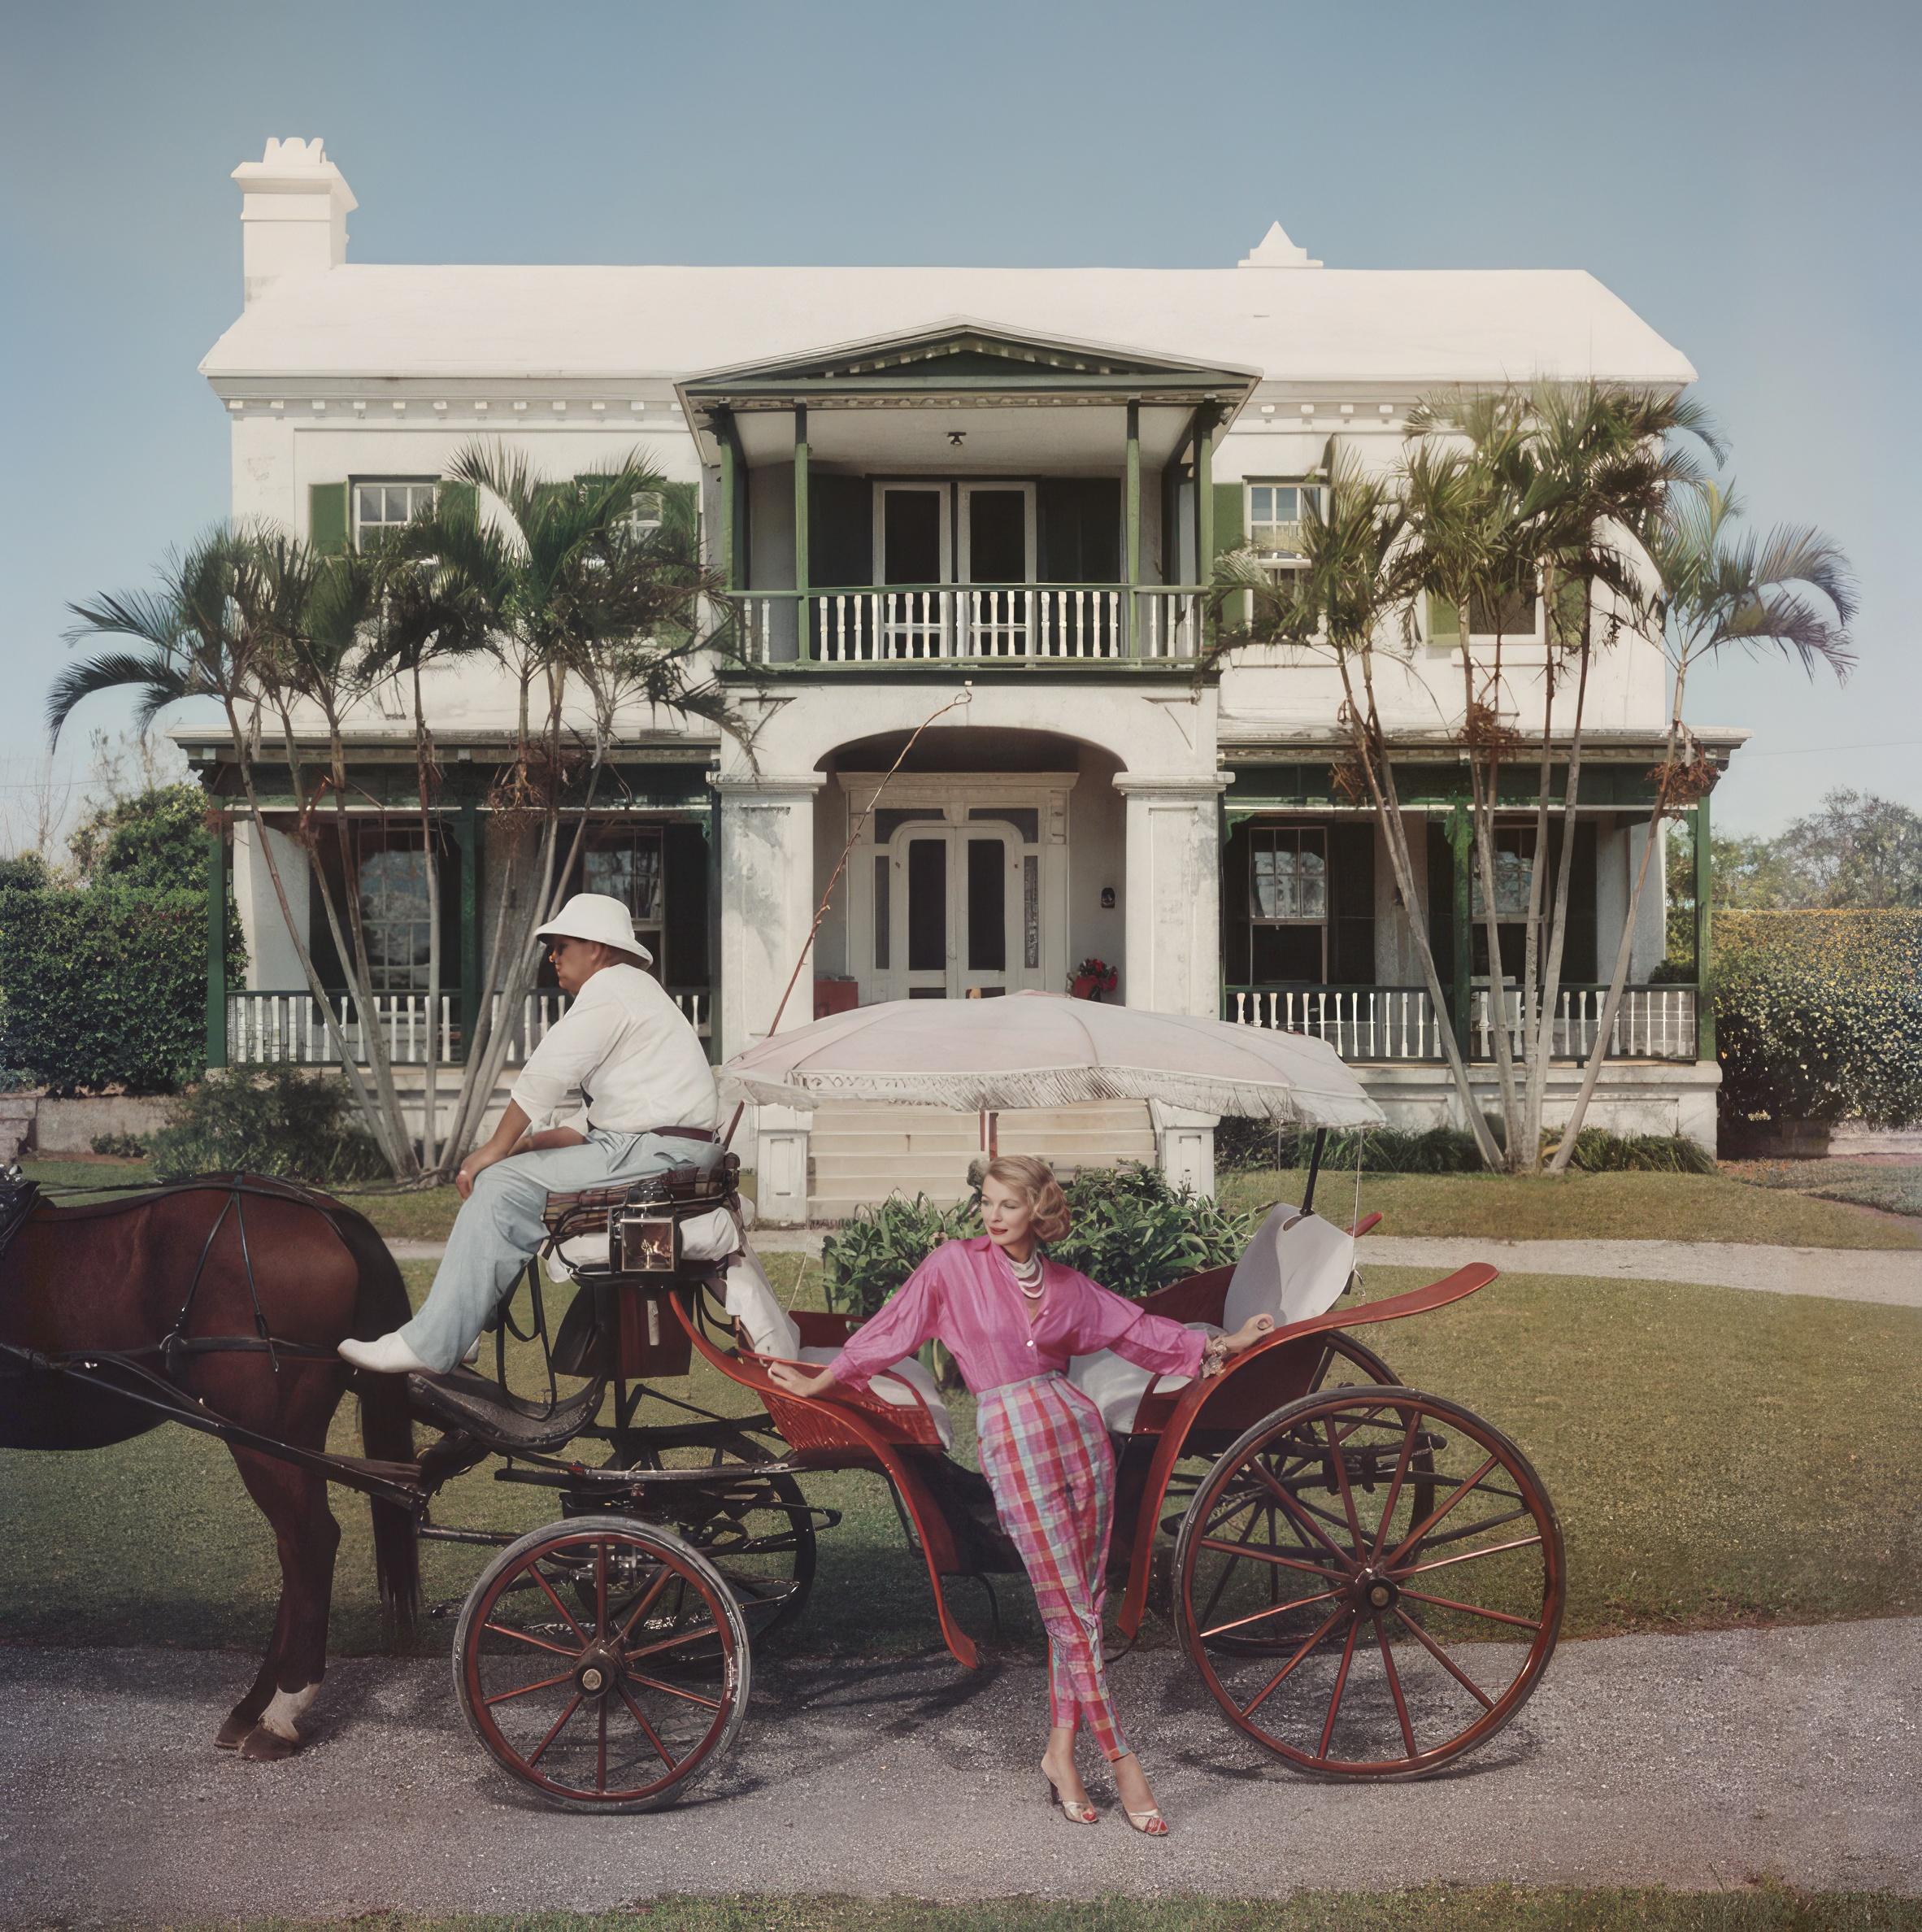 Bermudian Hostess
1957
C-print
Estate stamped and hand numbered edition of 150 with certificate of authenticity from the estate.   

Polly Trott Hornburg in front of her father's typical Bermudian house. She is wearing her own design of Thaibok